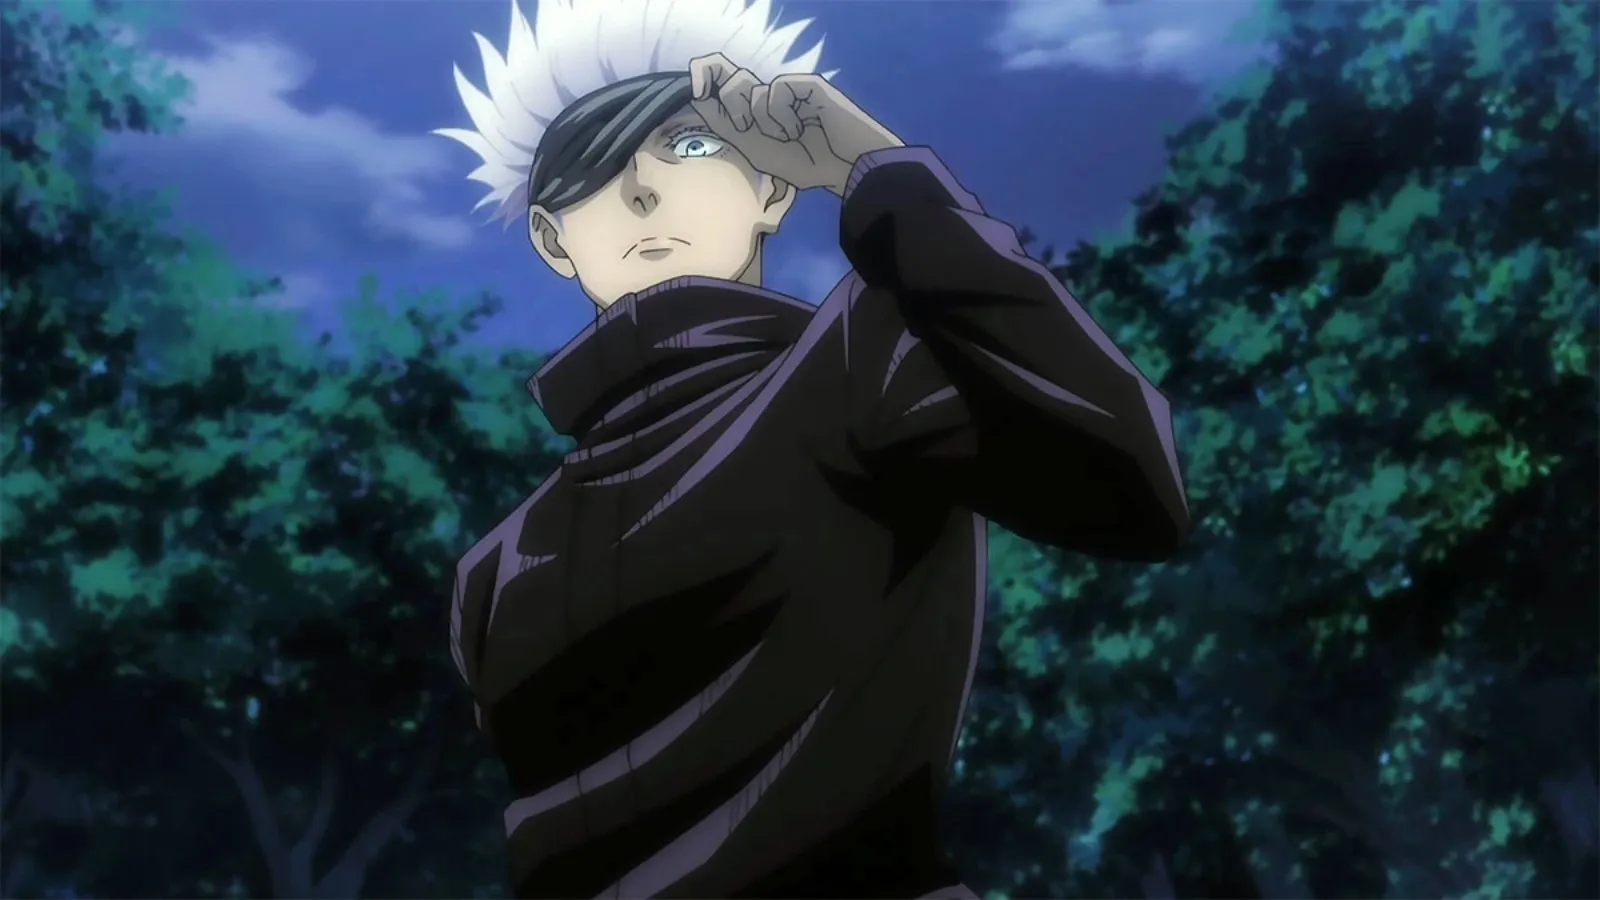 How Tall Is Gojo in Jujutsu Kaisen? Answered